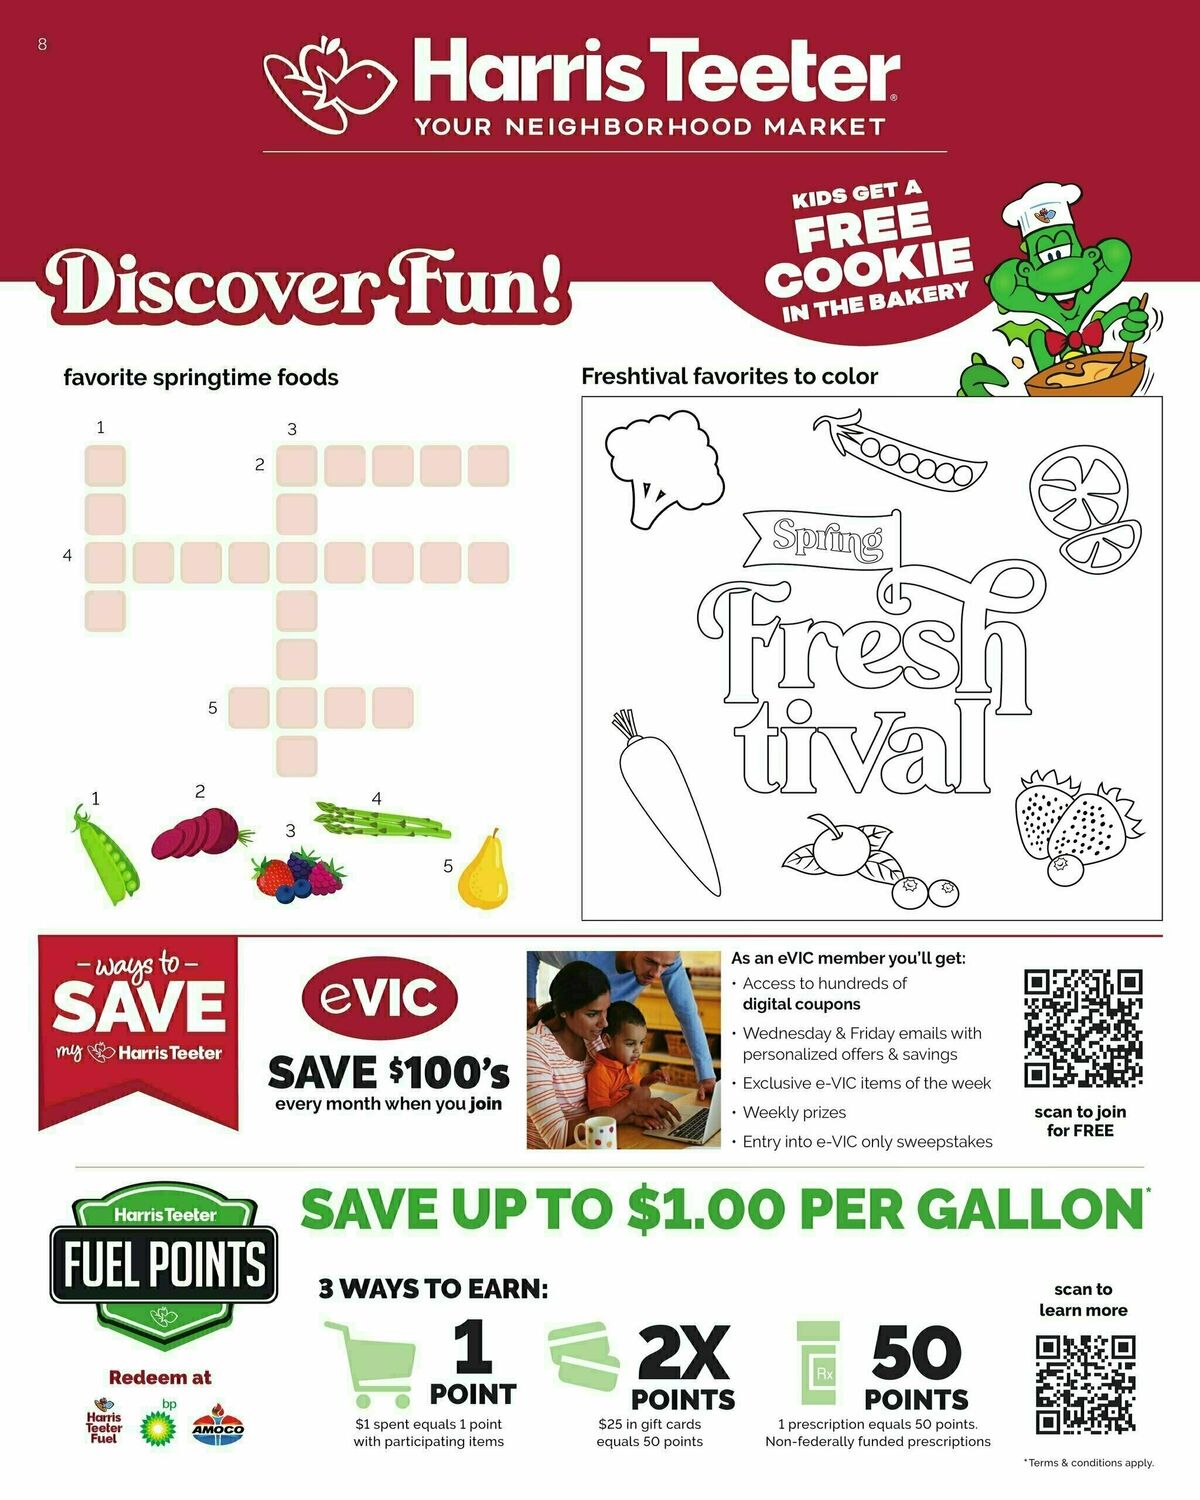 Harris Teeter Discovery - April Weekly Ad from March 27